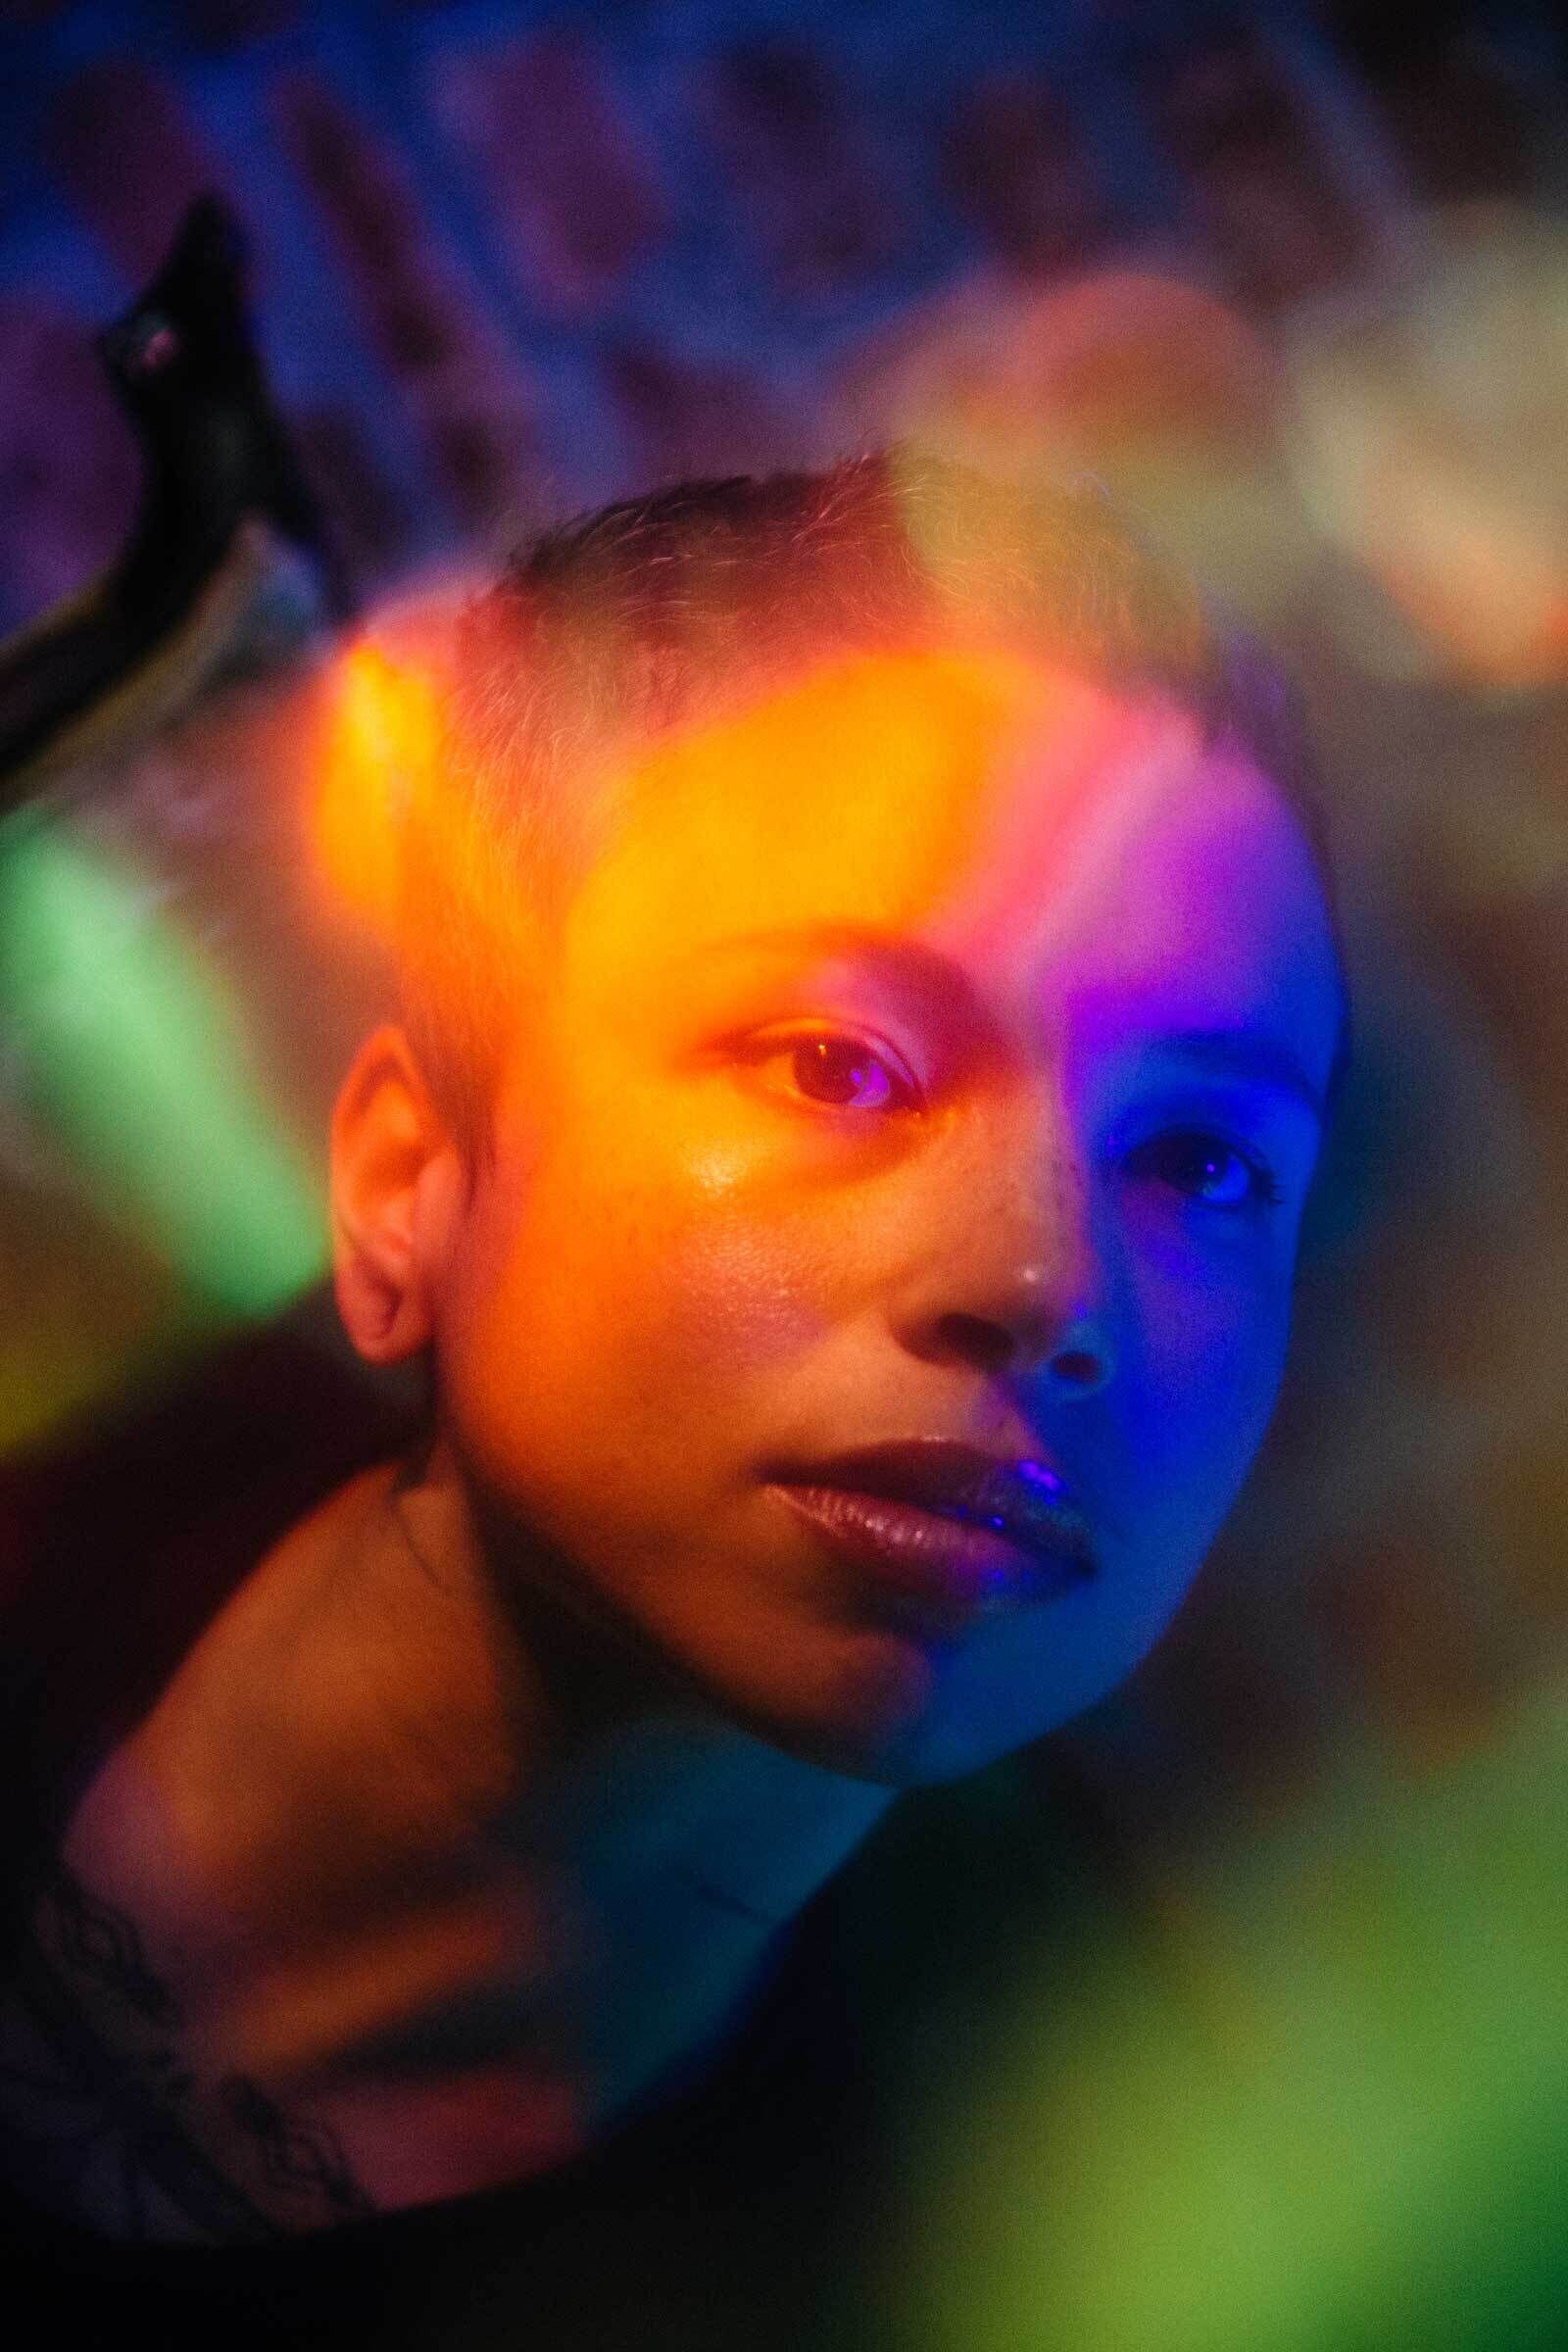 Person with a buzz cut in colorful lighting looking thoughtfully to the side.